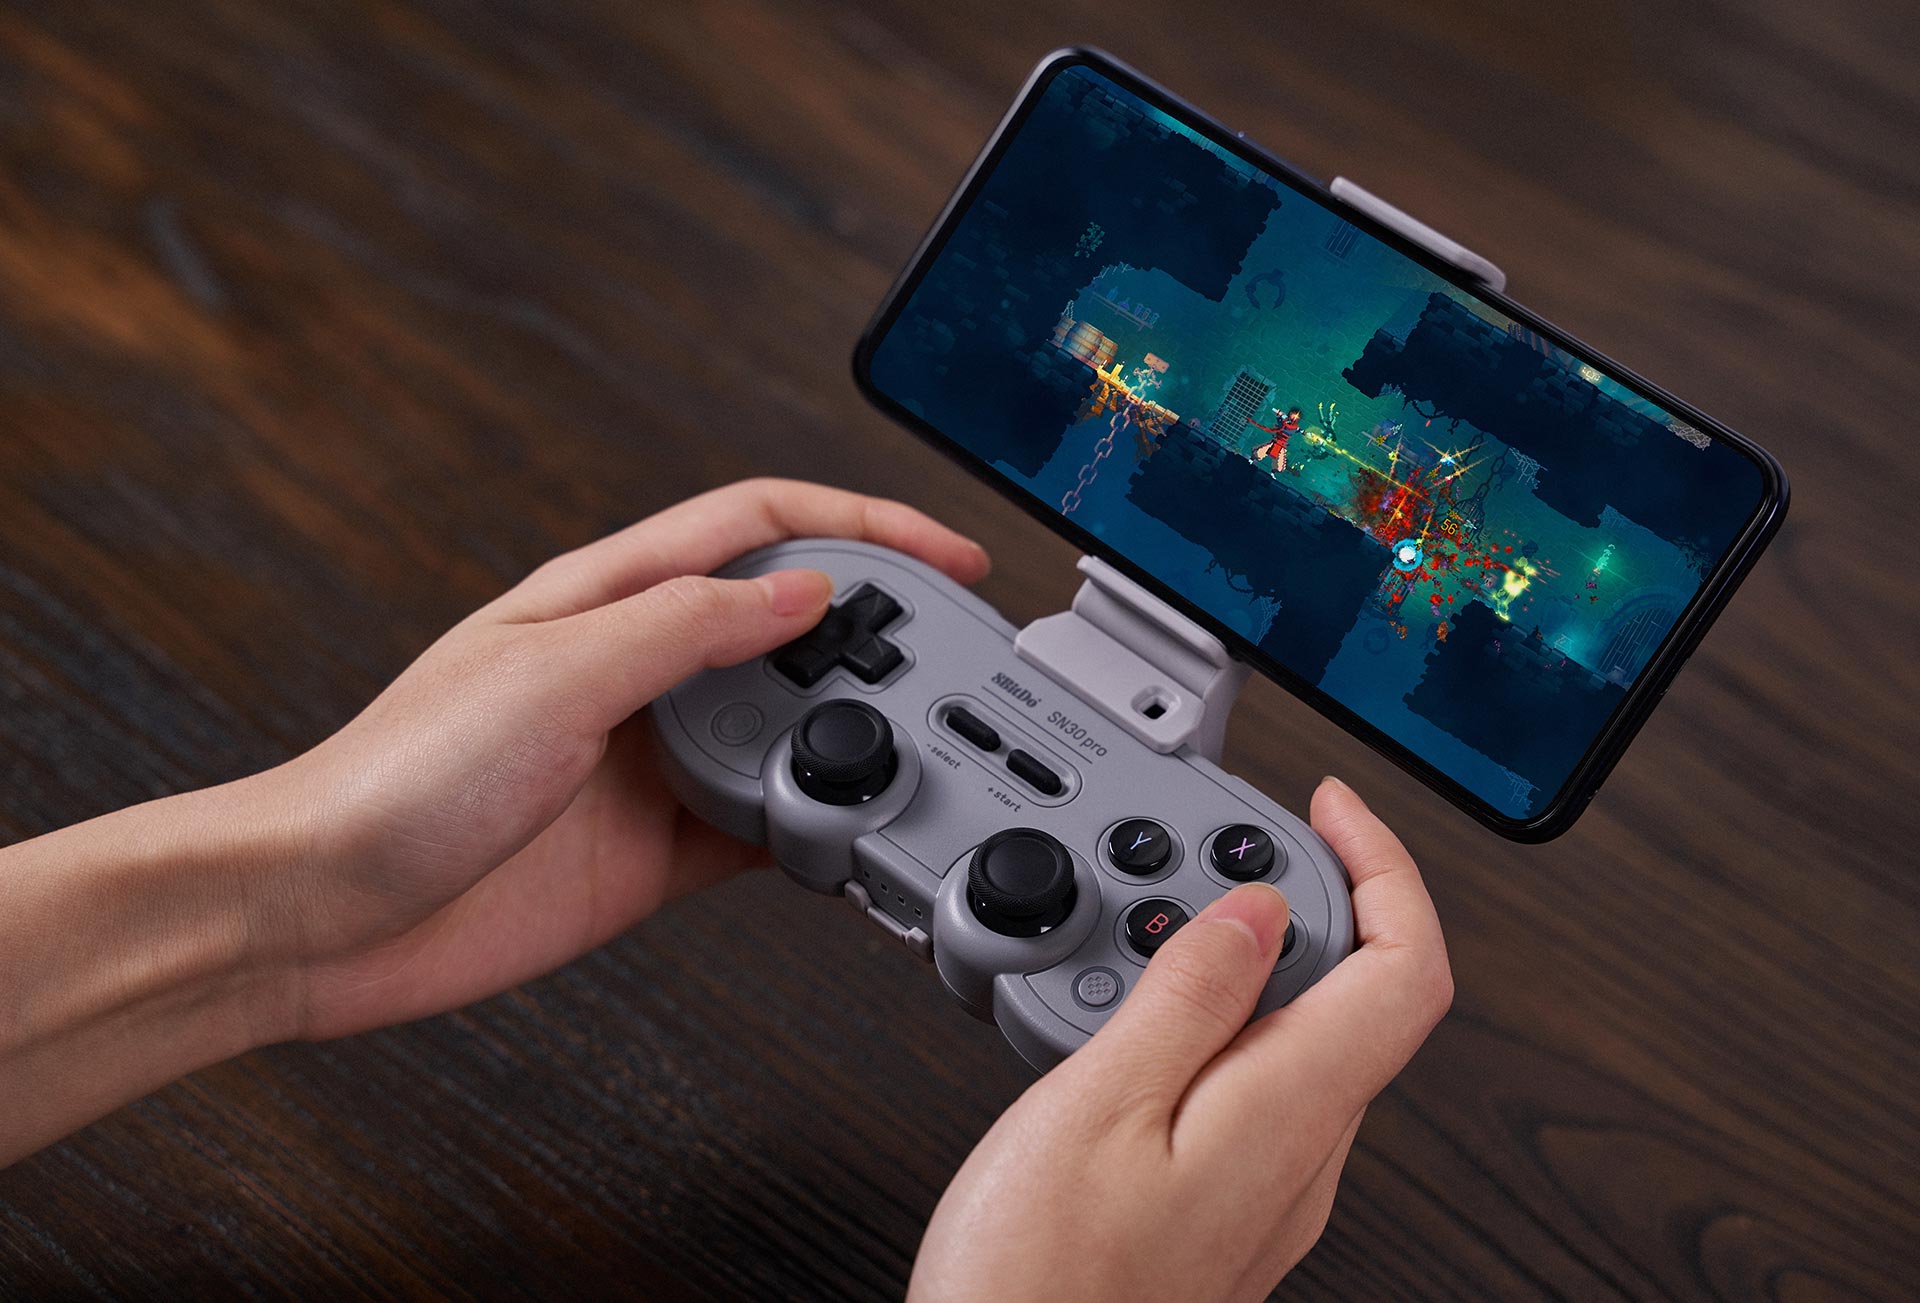 8Bitdo SN30 Pro Gamepad for PC, Mac, Android, SW - Bitcoin